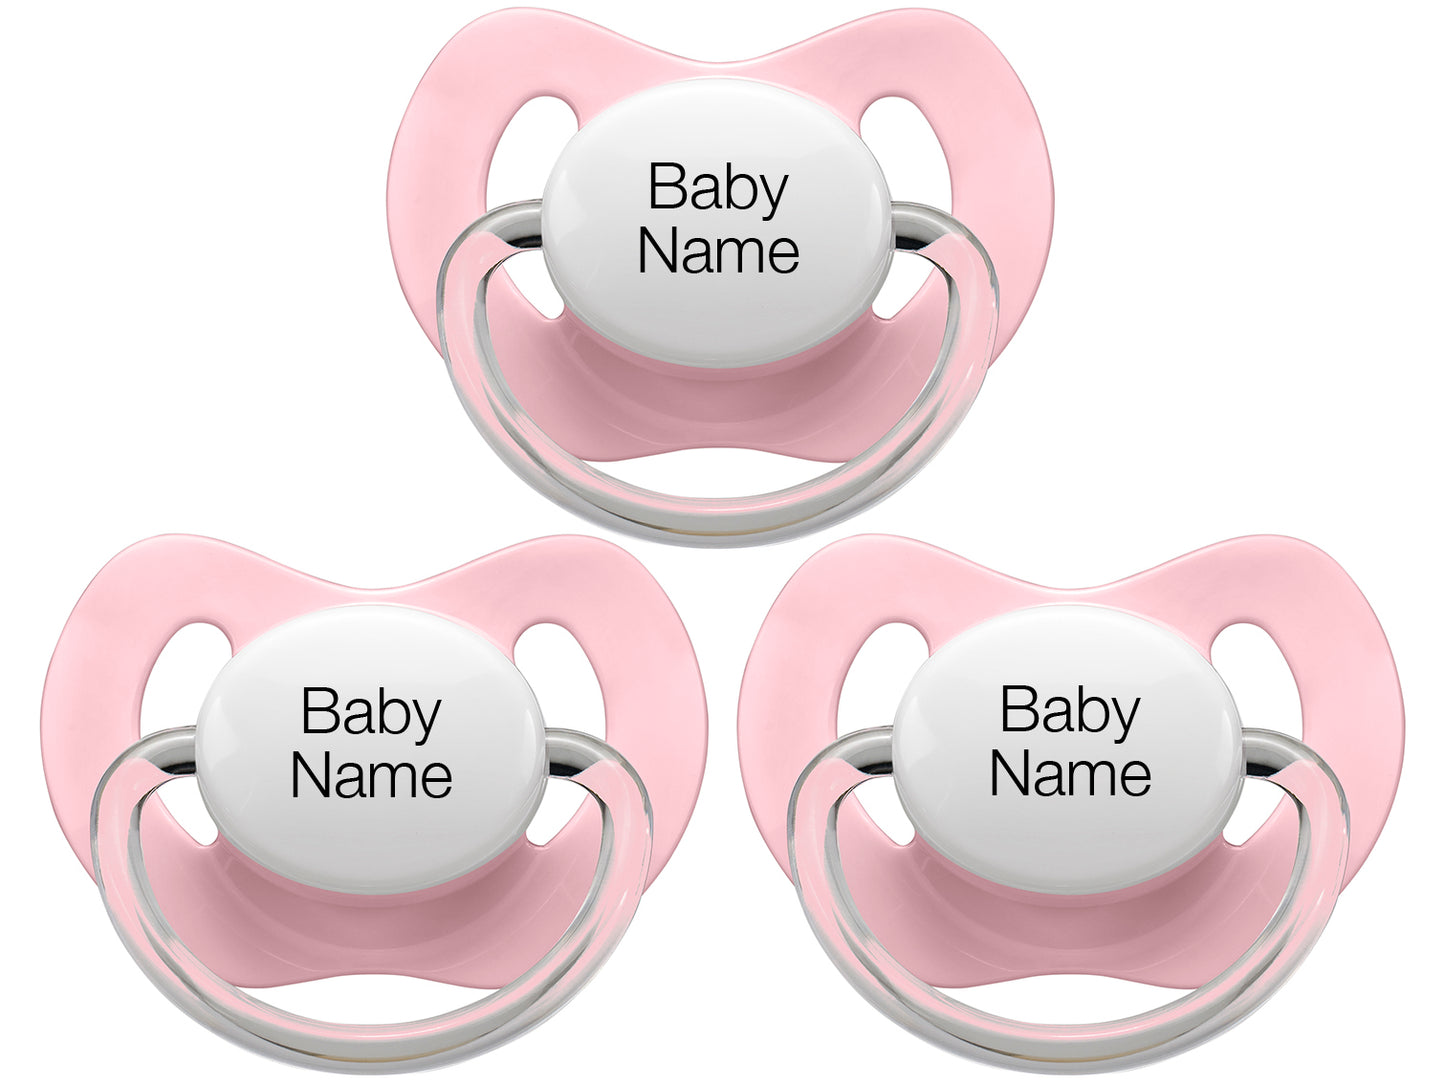 Personalised Pacifiers 3 pcs.  - Pink